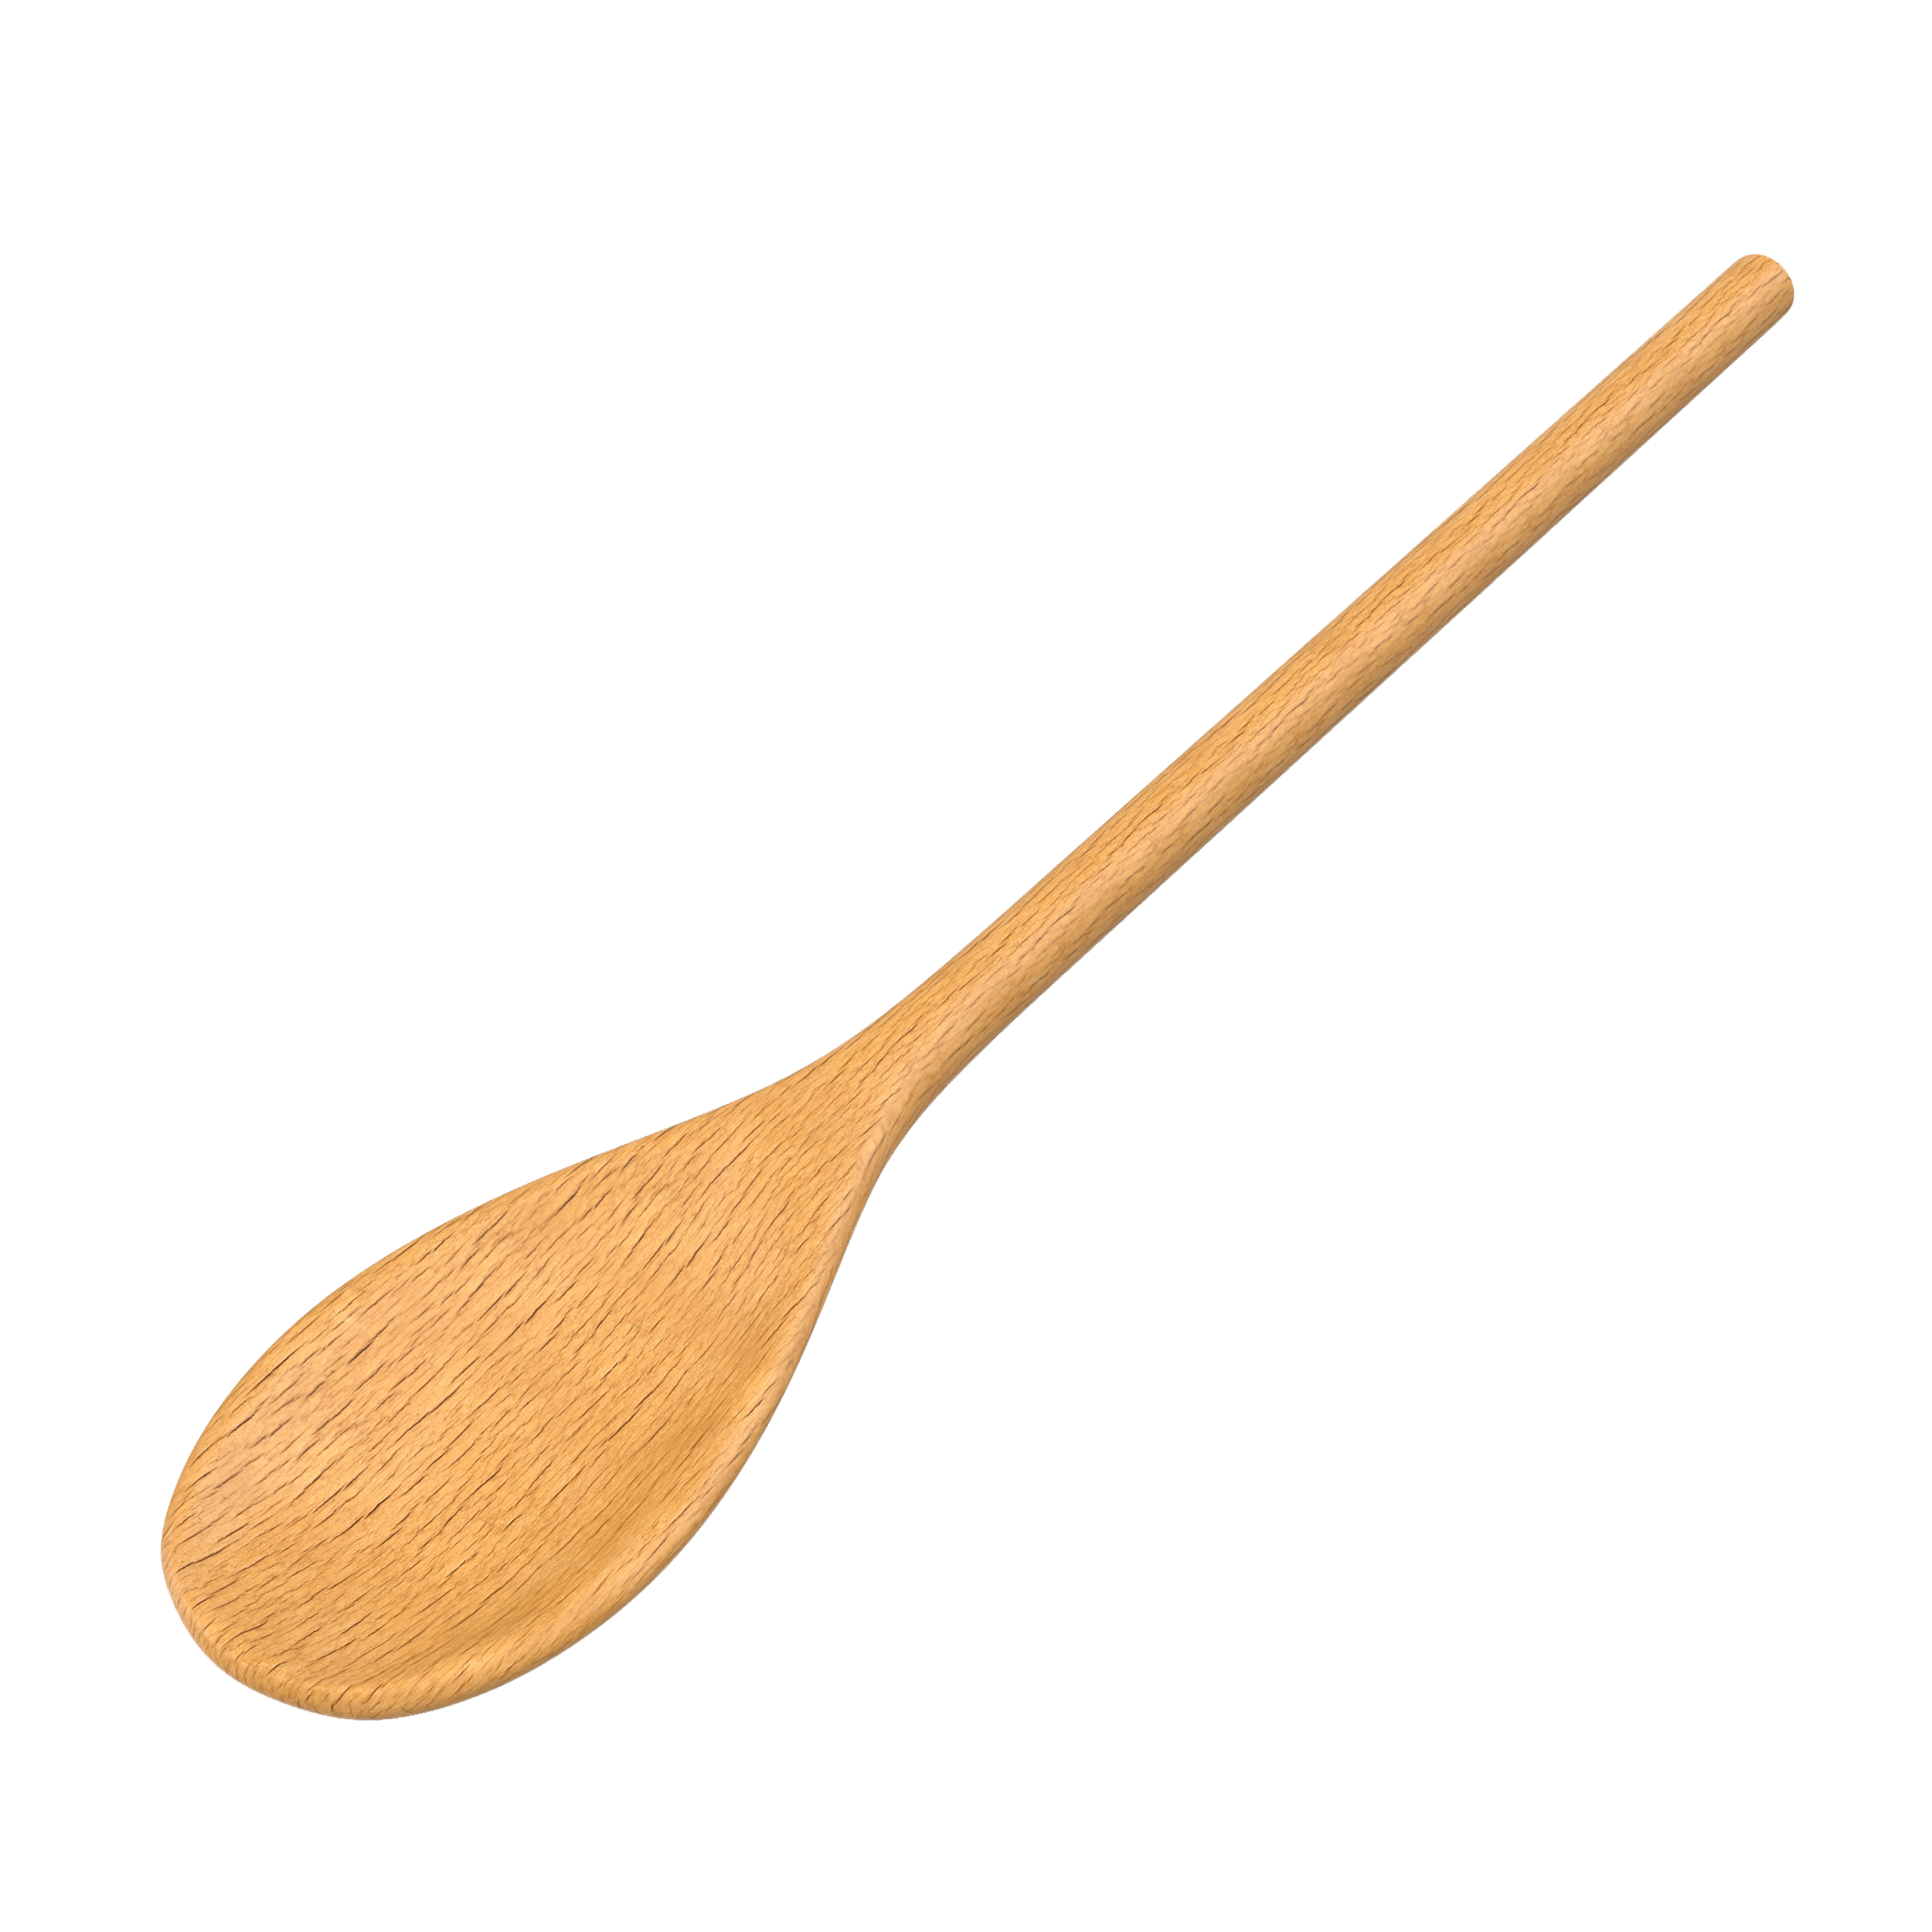 Wooden Spoon Transparent PNG Image